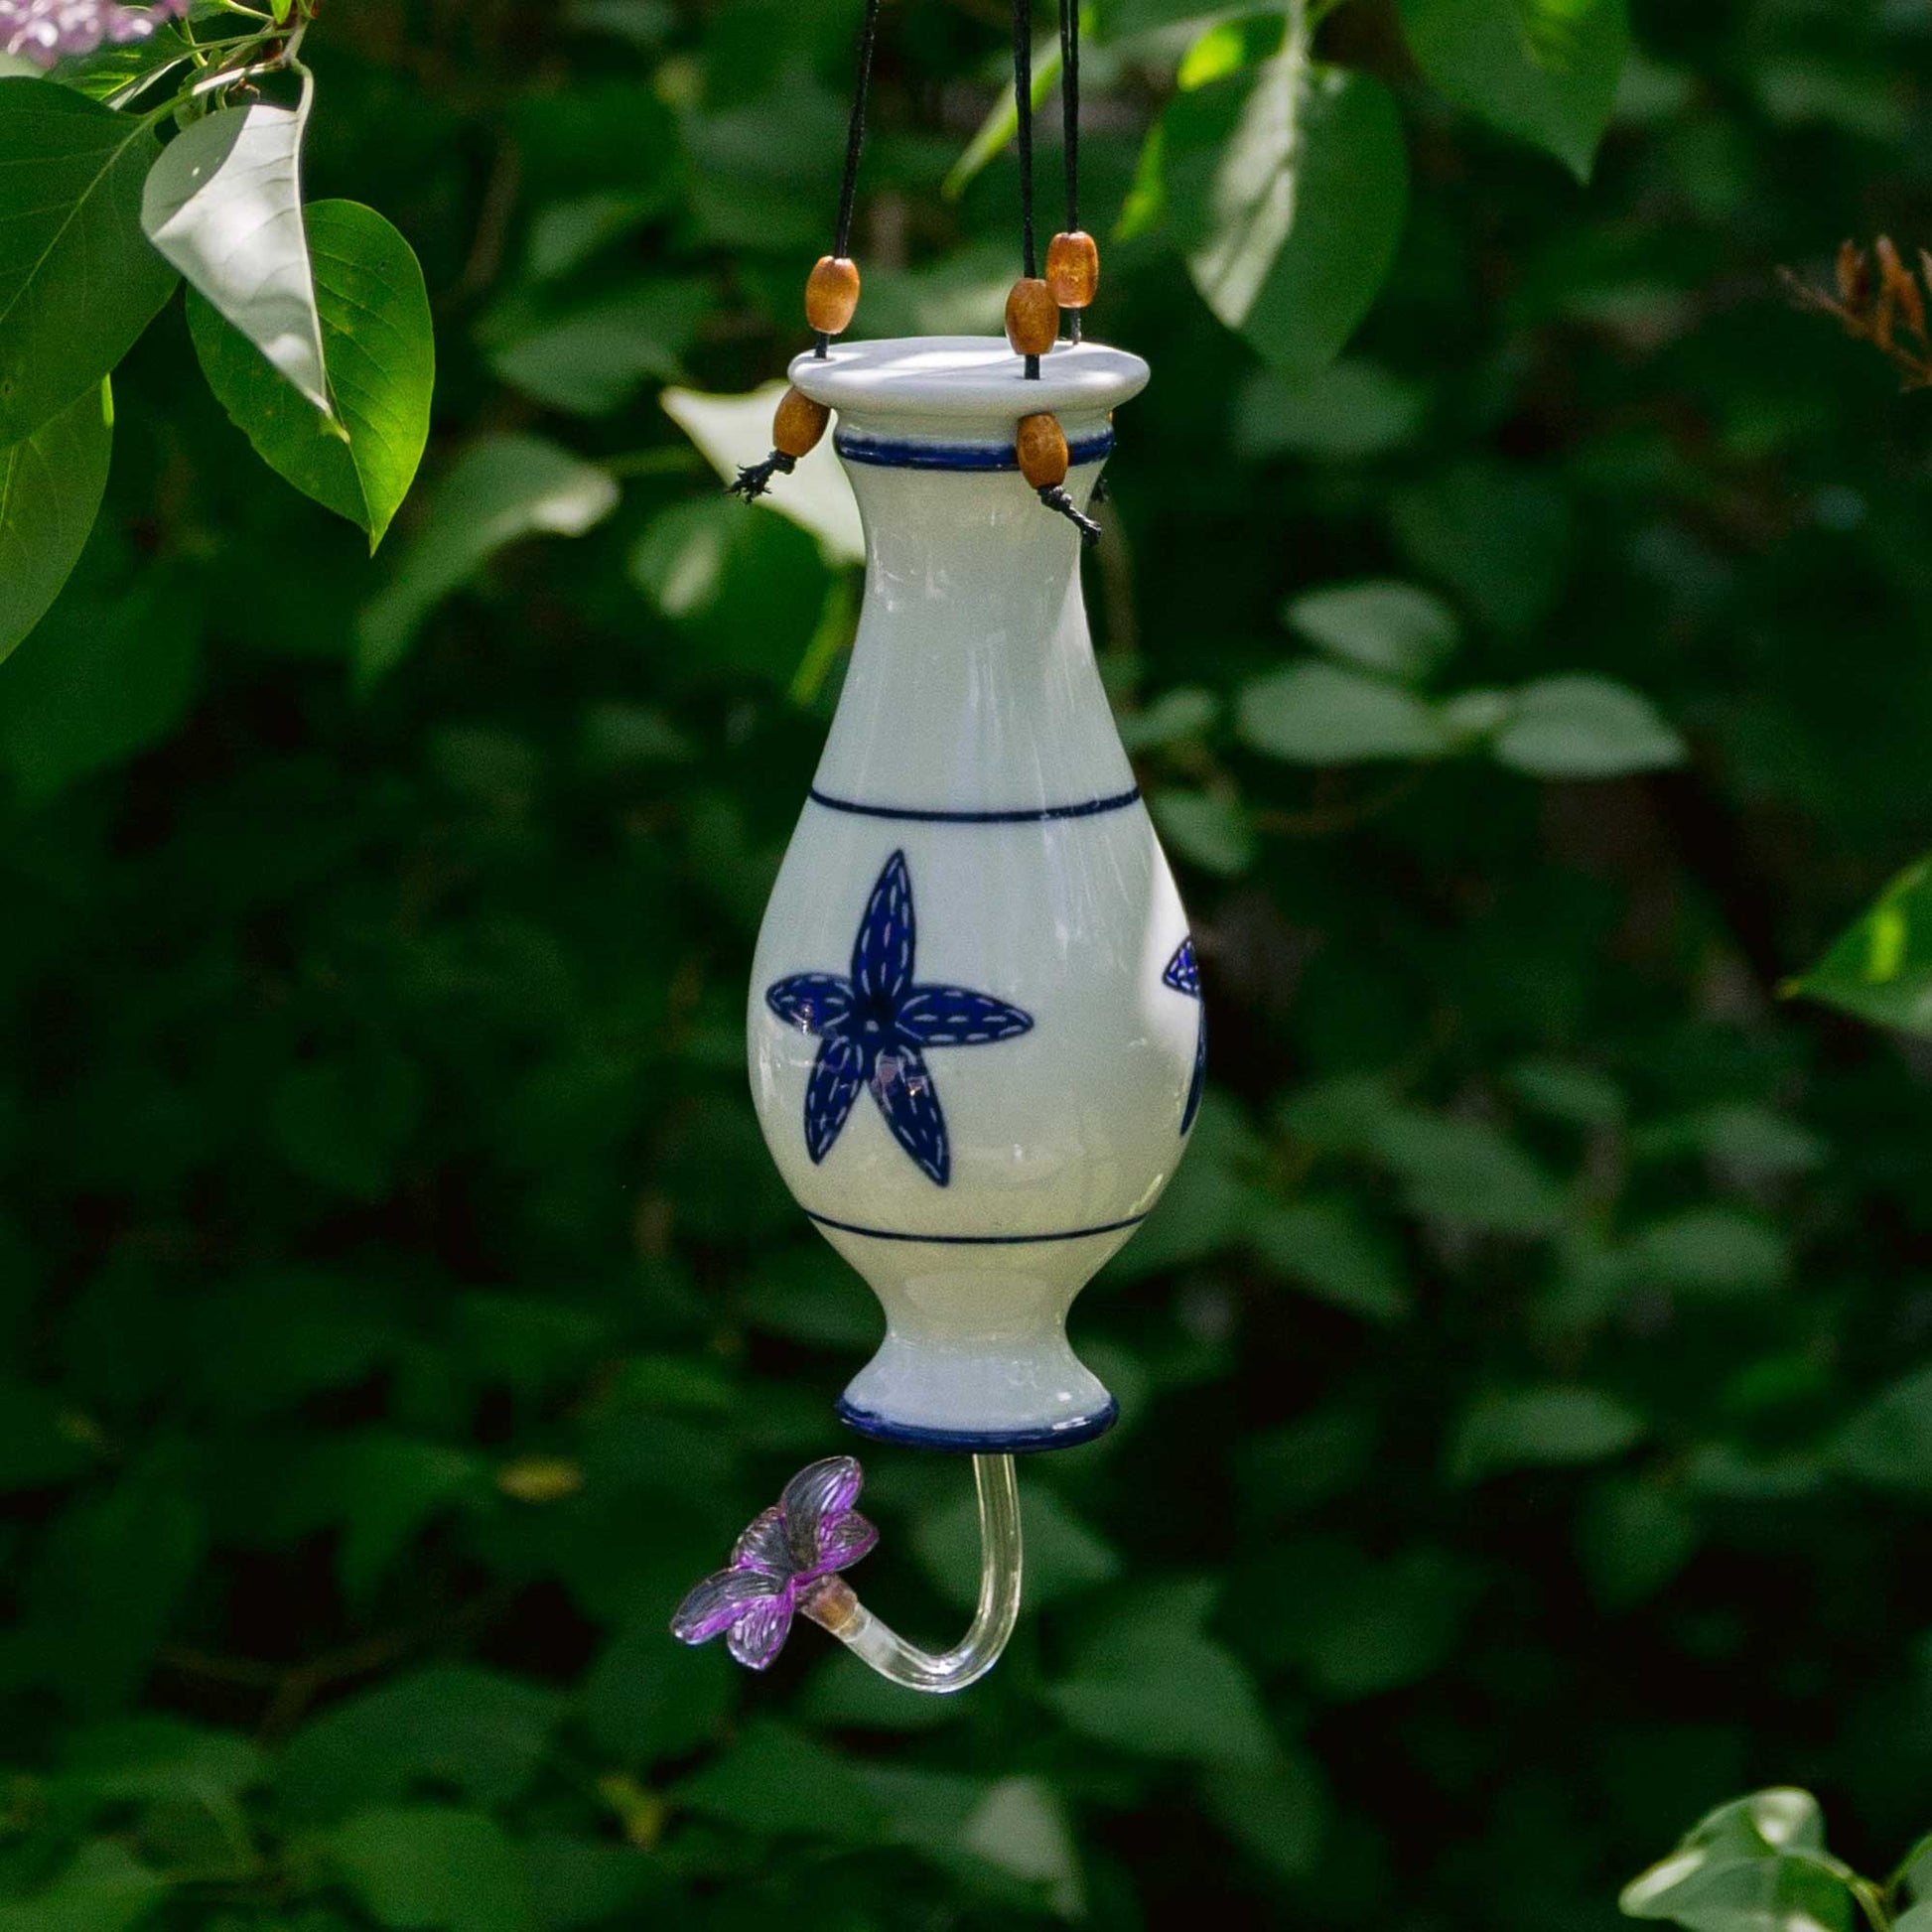 Handmade Pottery Bottle Hummingbird Feeder in Starfish pattern made by Georgetown Pottery in Maine